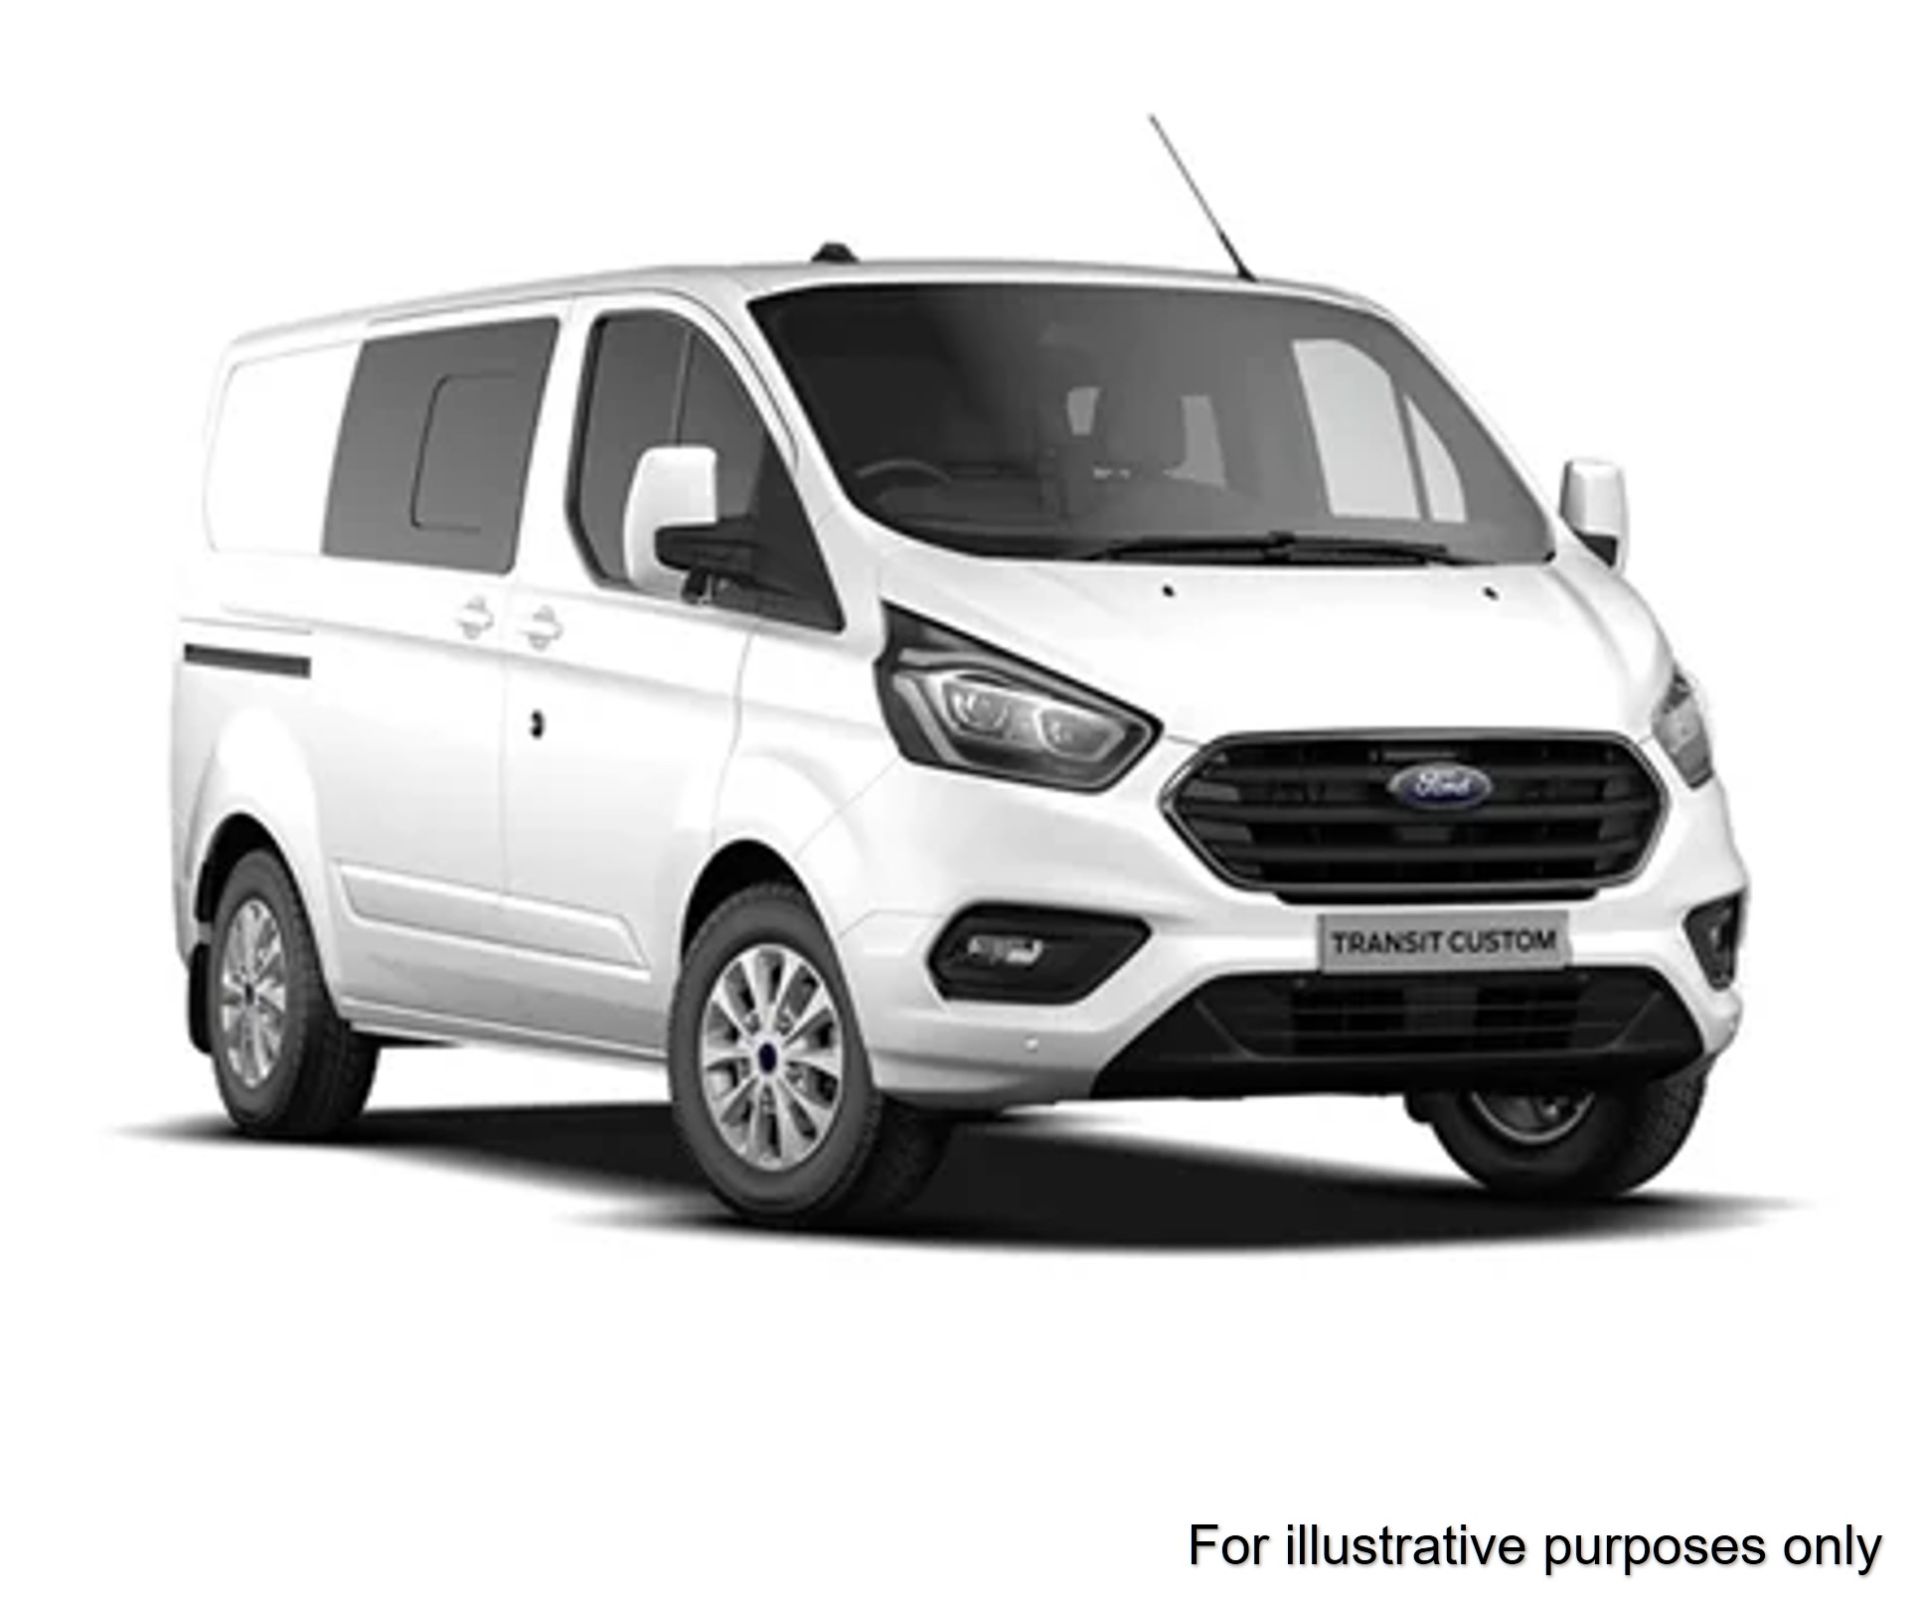 2019 Ford Transit Custom 300 L1 2.0ECOBLUE 105PS LOW ROOF DOUBLE CAB LEADER EURO 6 (FG69ZYC)